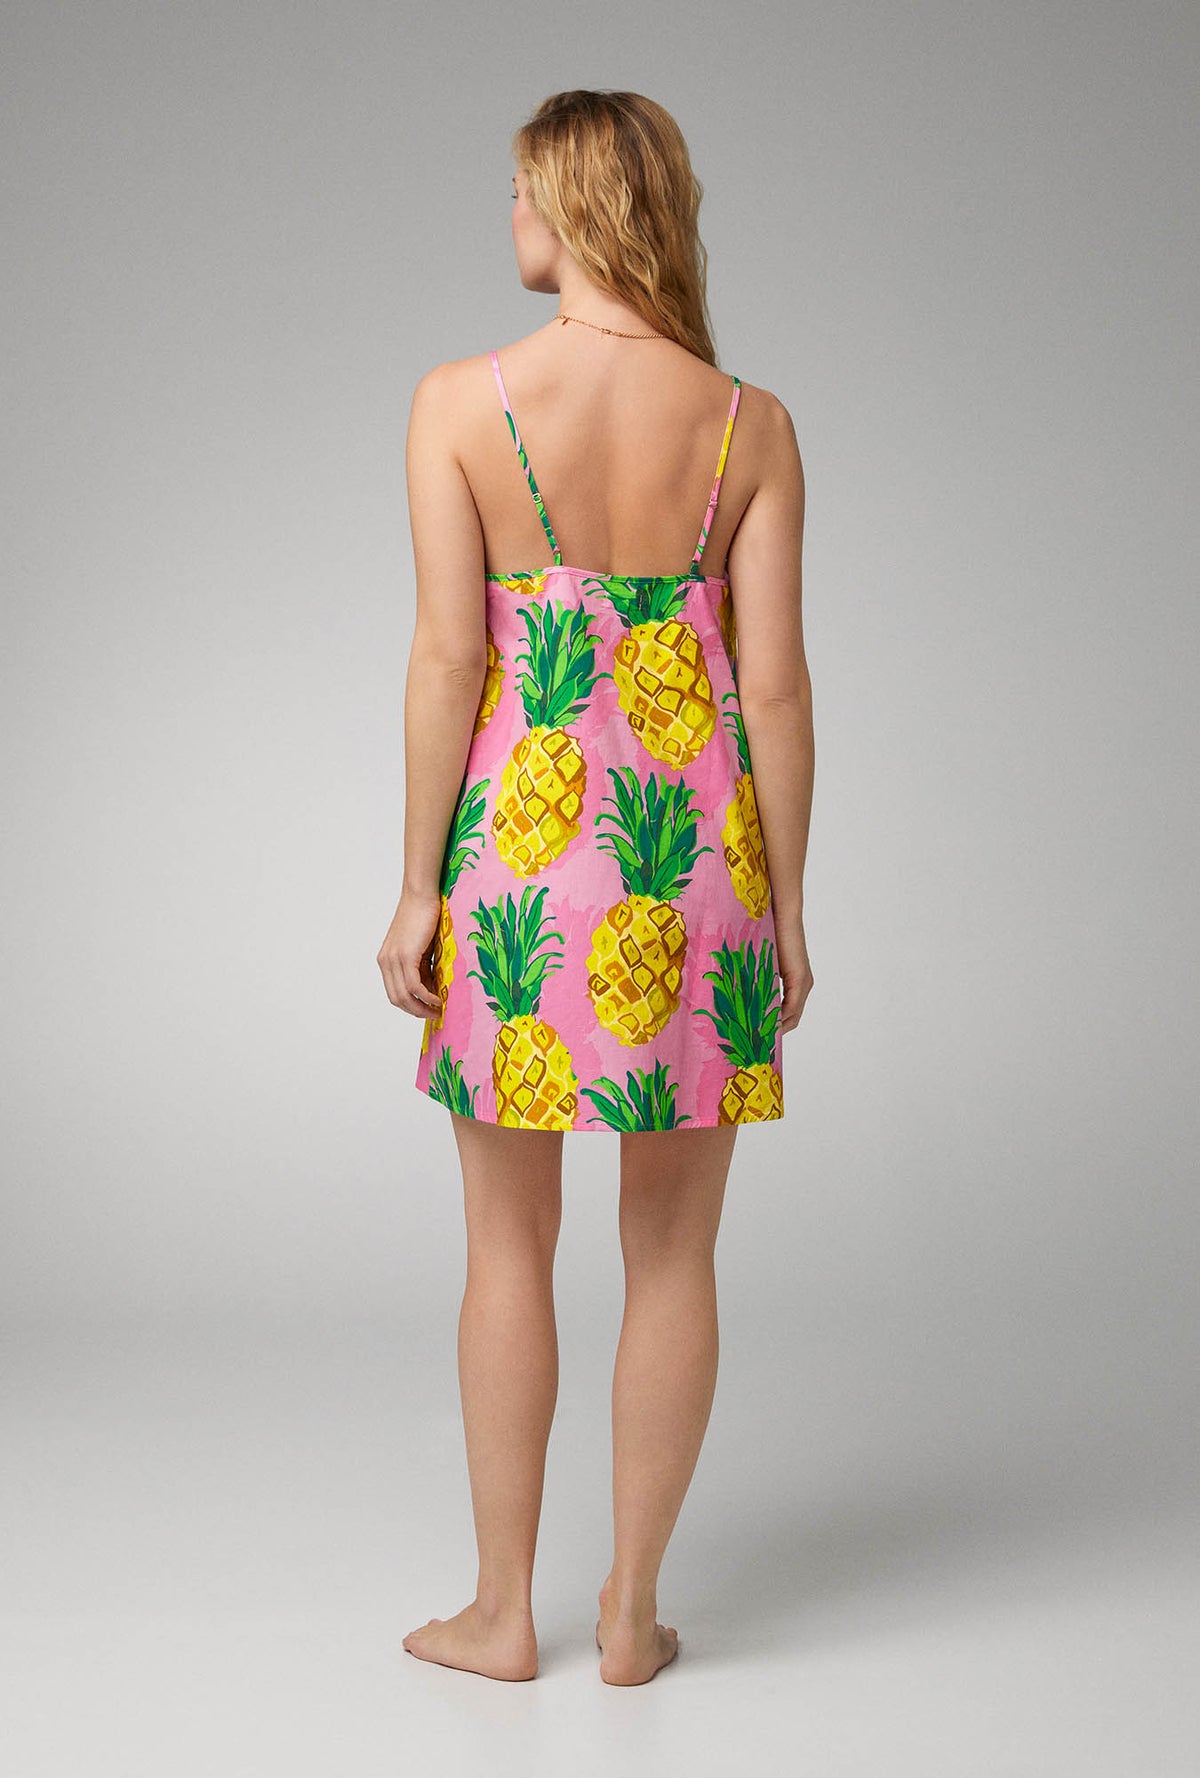 A lady wearing Woven Poplin Chemise with Pineapple print